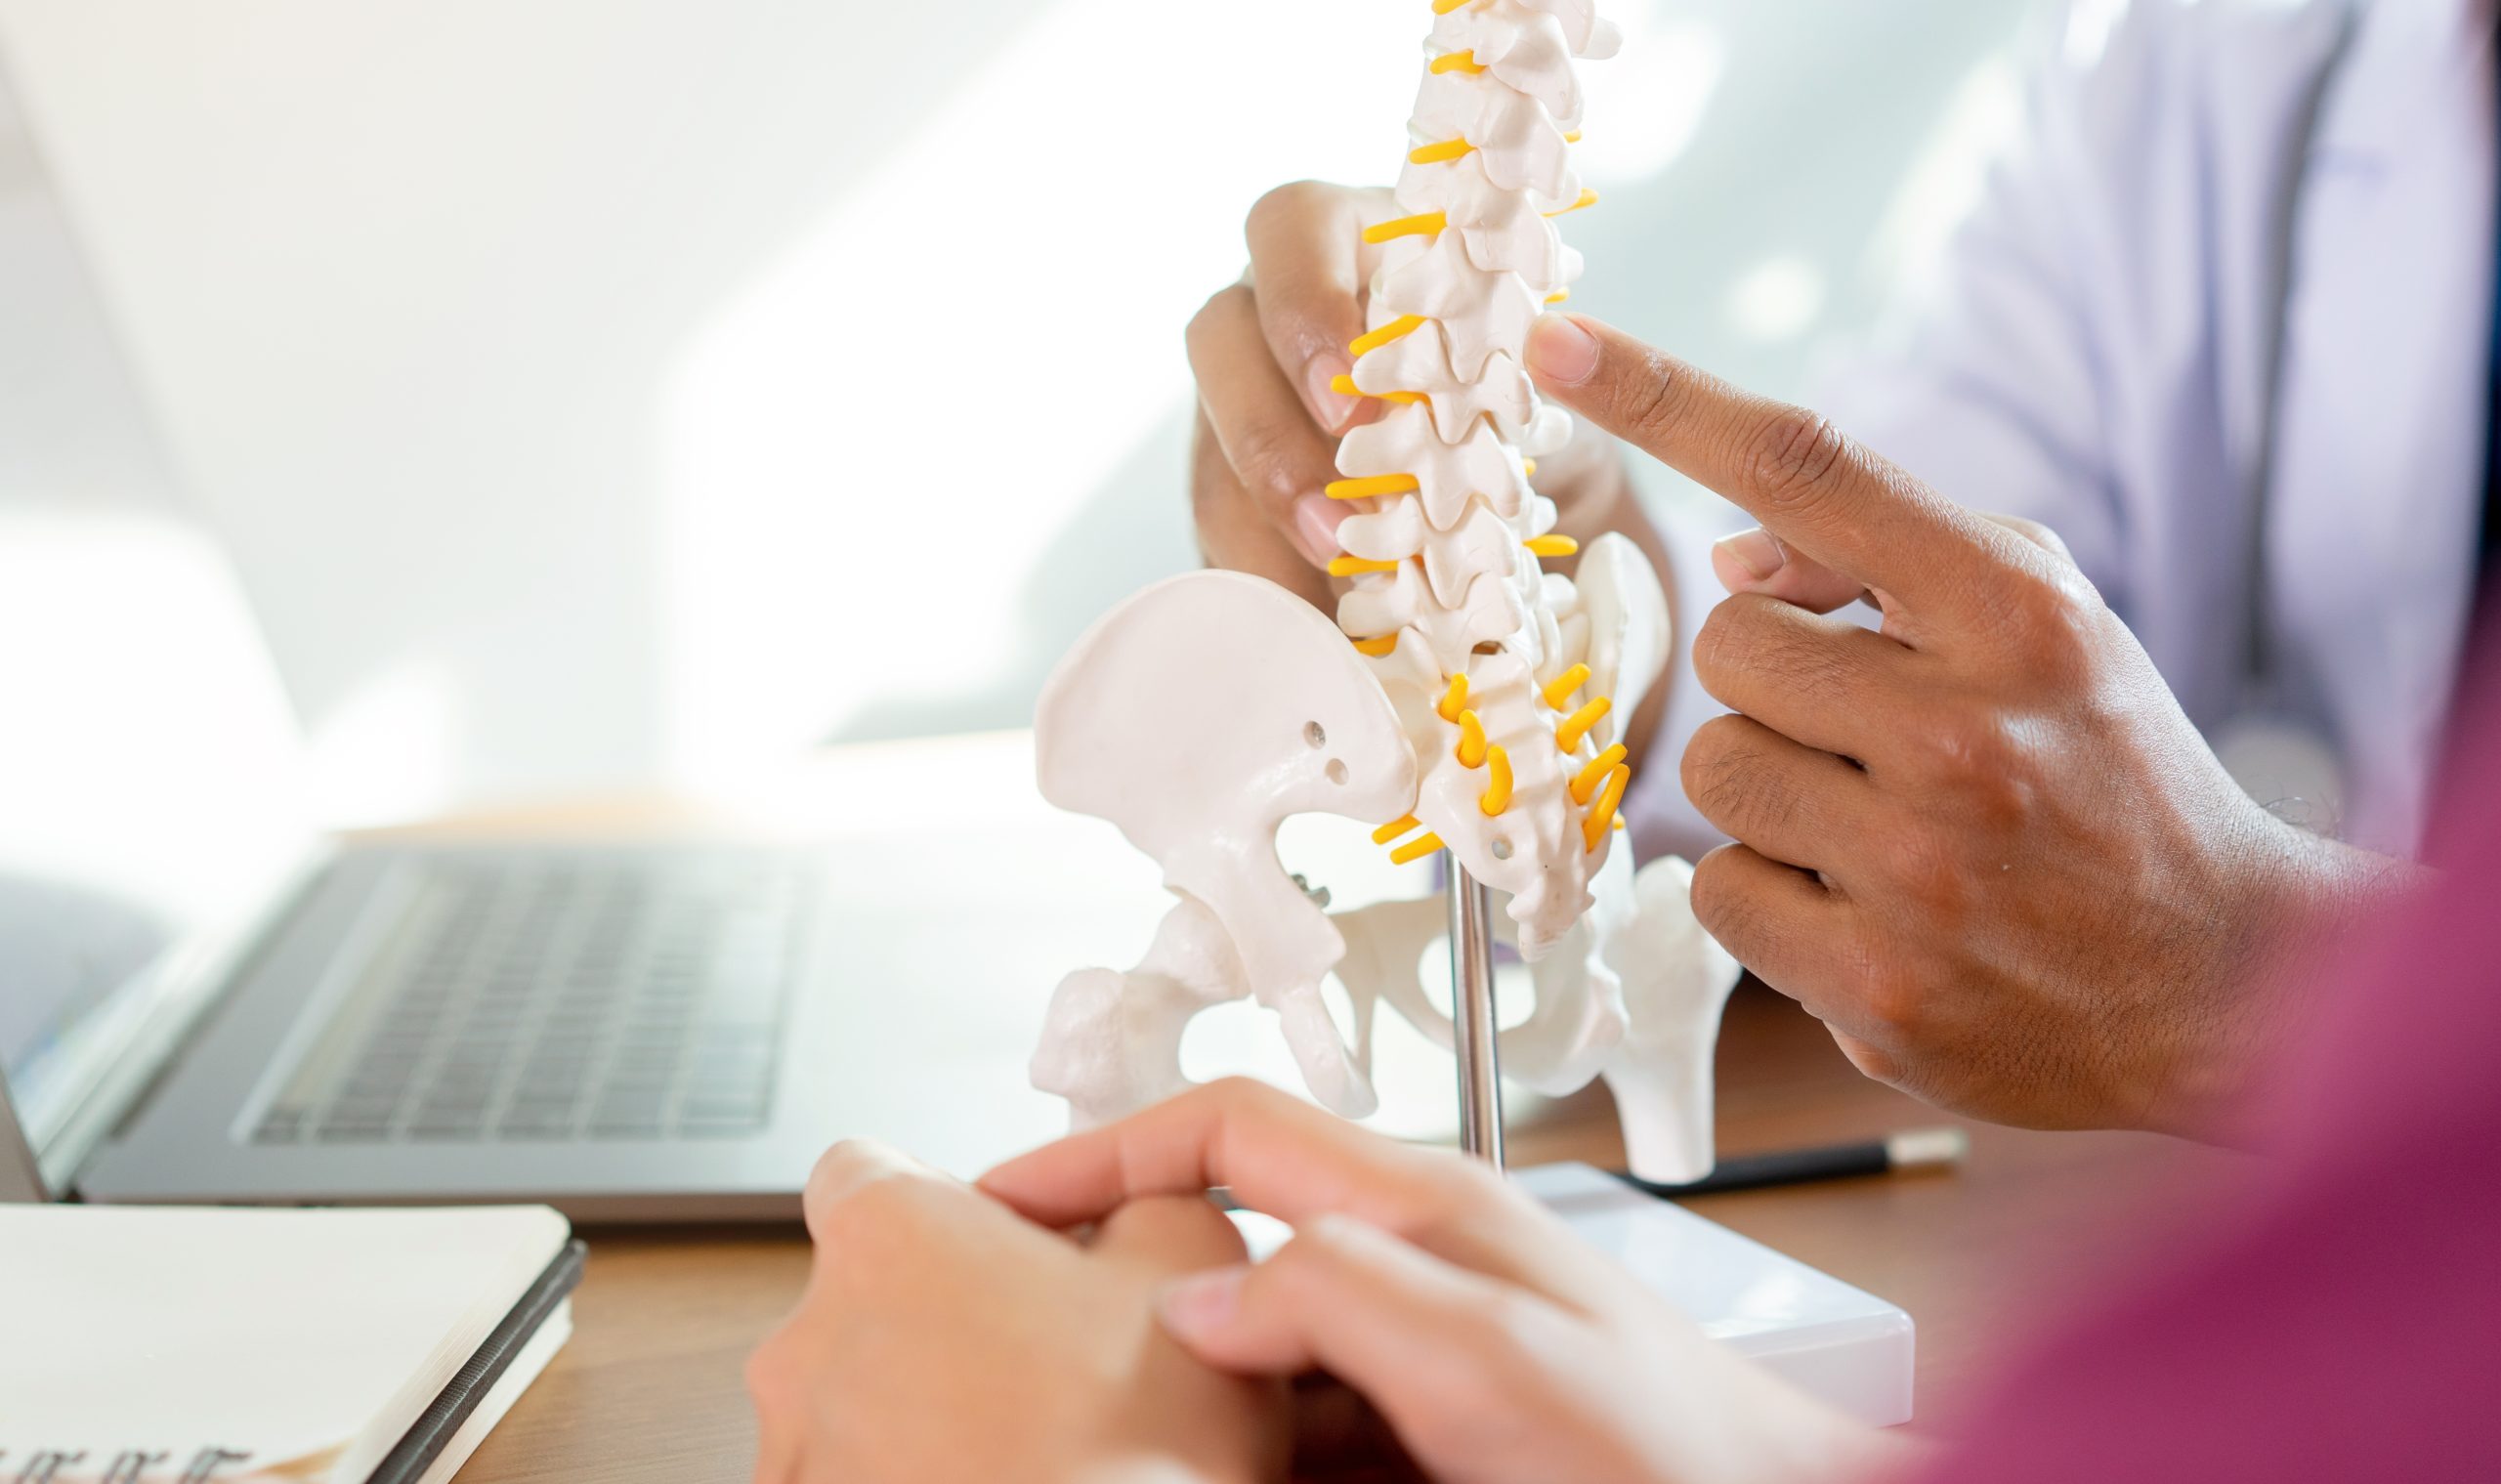 Chiropractic Care For Upper Cervical Pain Near Mukilteo, WA